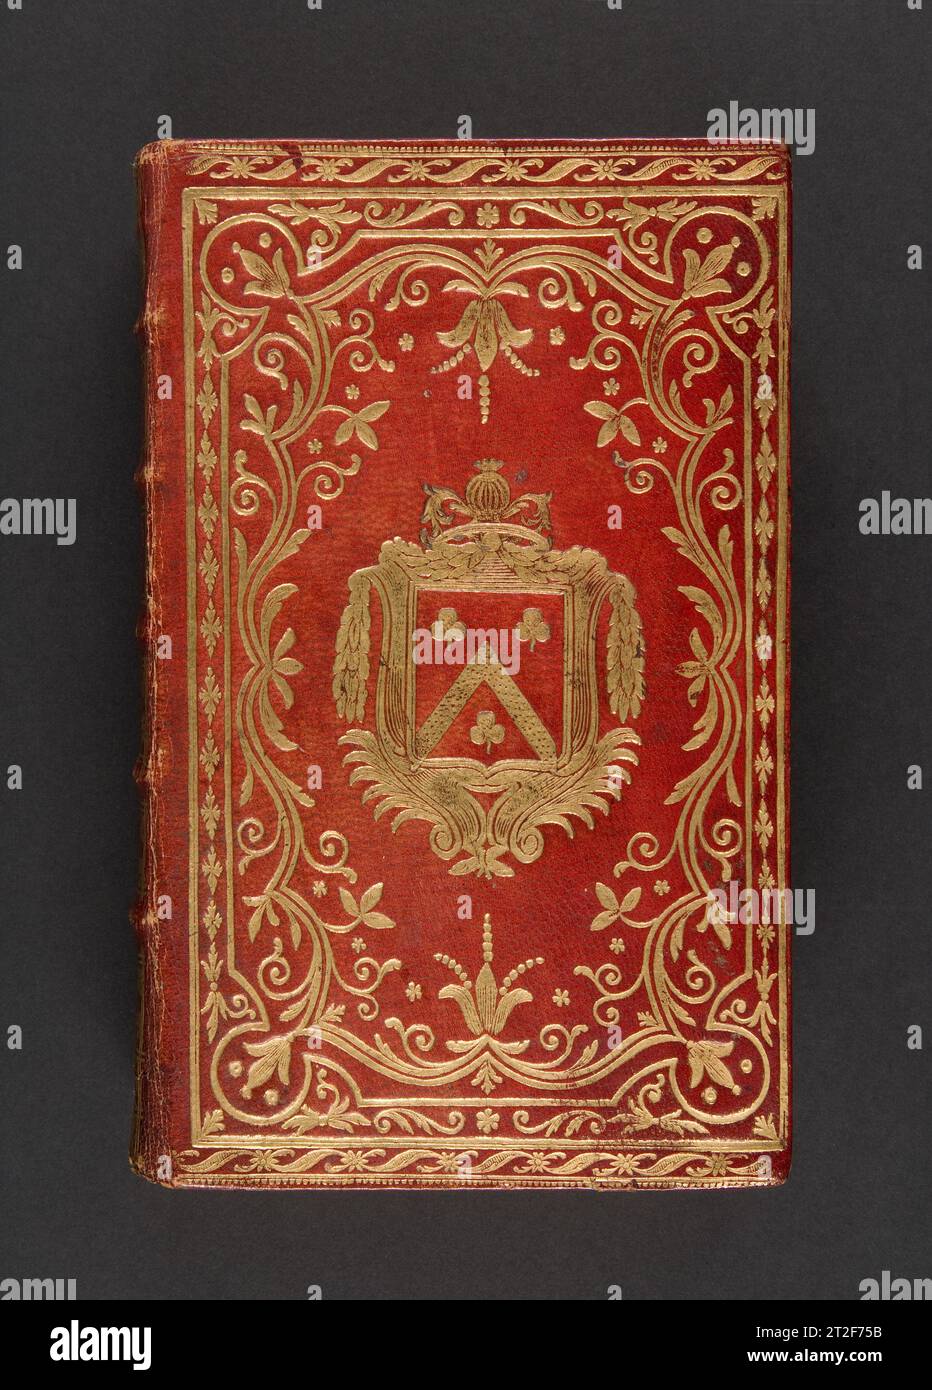 Almanach royal, année bissextile M.DCC.LXXXVIII, présenté a sa Majeste pour la premiere fois en 1699 Publisher Laurent Charles d' Houry French 1787 Bound in an armorial binding with the coat of arms of Claude Barthelot, marquis de Rambuteau. The binding is covered in full red morocco, gold-tooled on both covers, spine and board edges. The coat of arms of Claude Barthelot, marquis de Rambuteau, is tooled in the center of the identical covers. The arms are surrounded with undulating floral designs, bordered by linear decorative motifs. Stock Photo